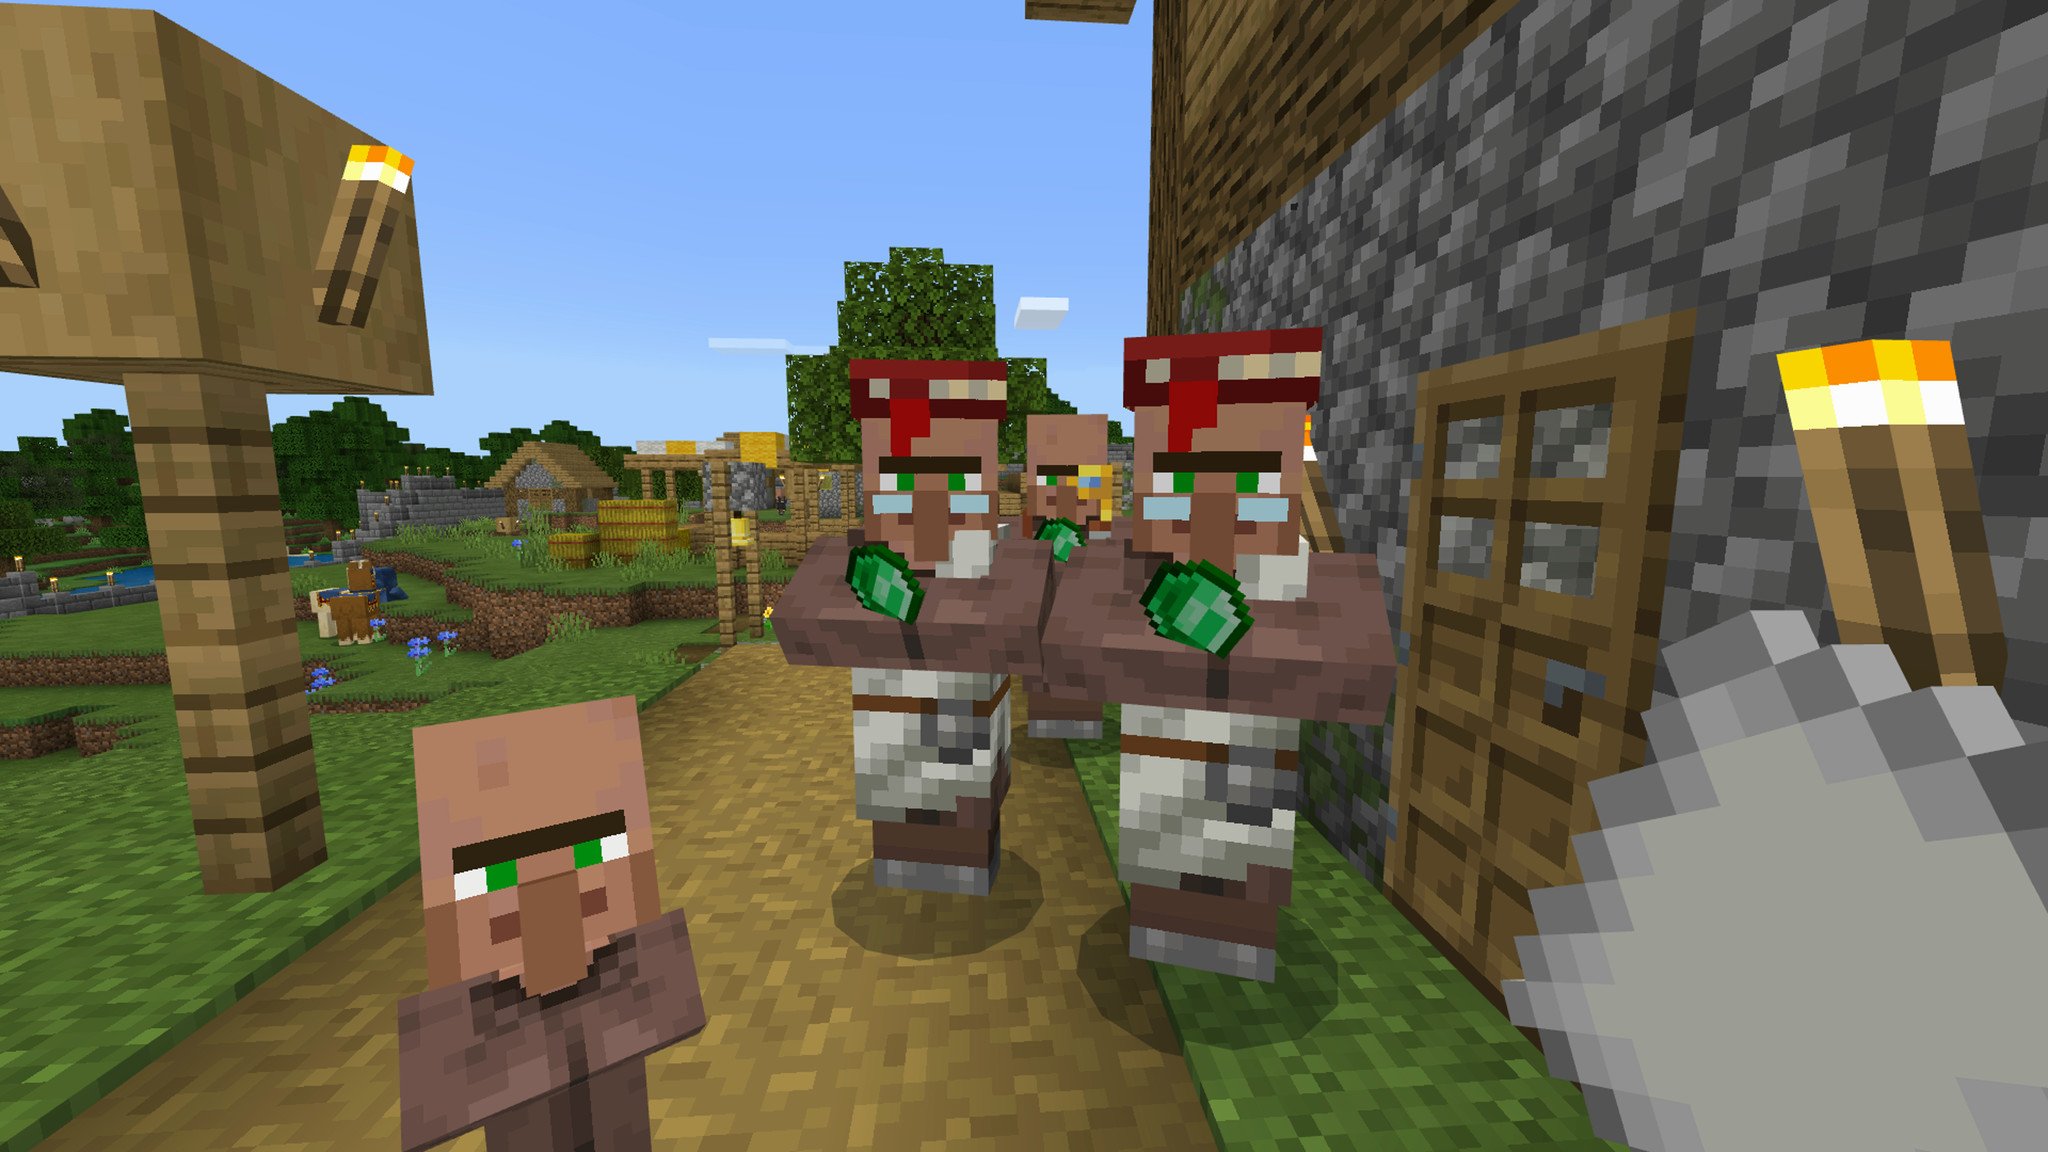 Villagers showing me their emeralds